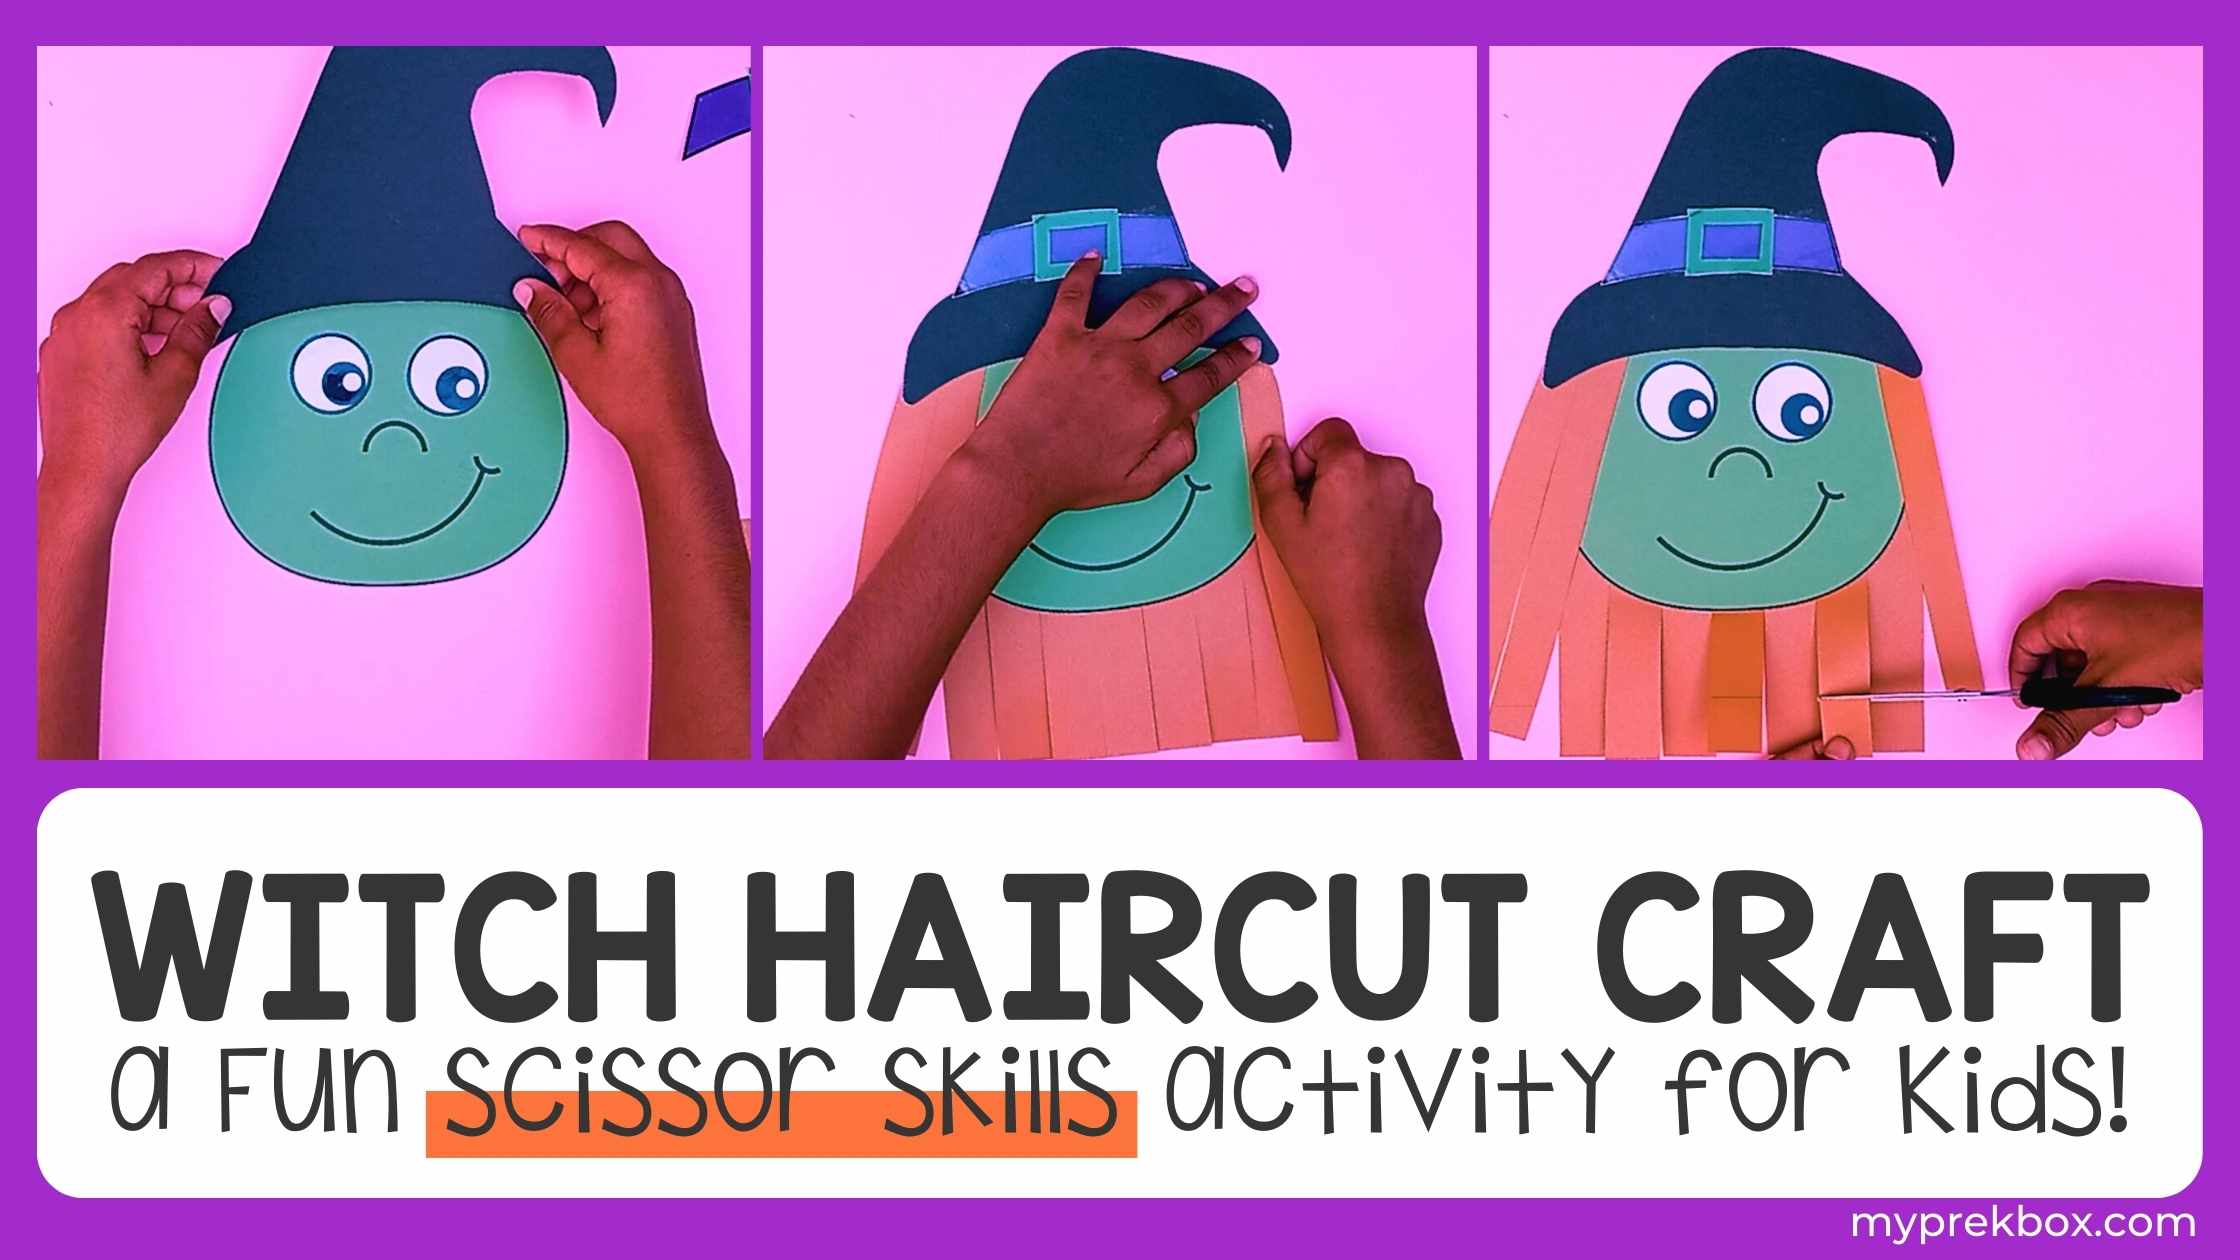 Scissor cutting activity for kids - Laughing Kids Learn